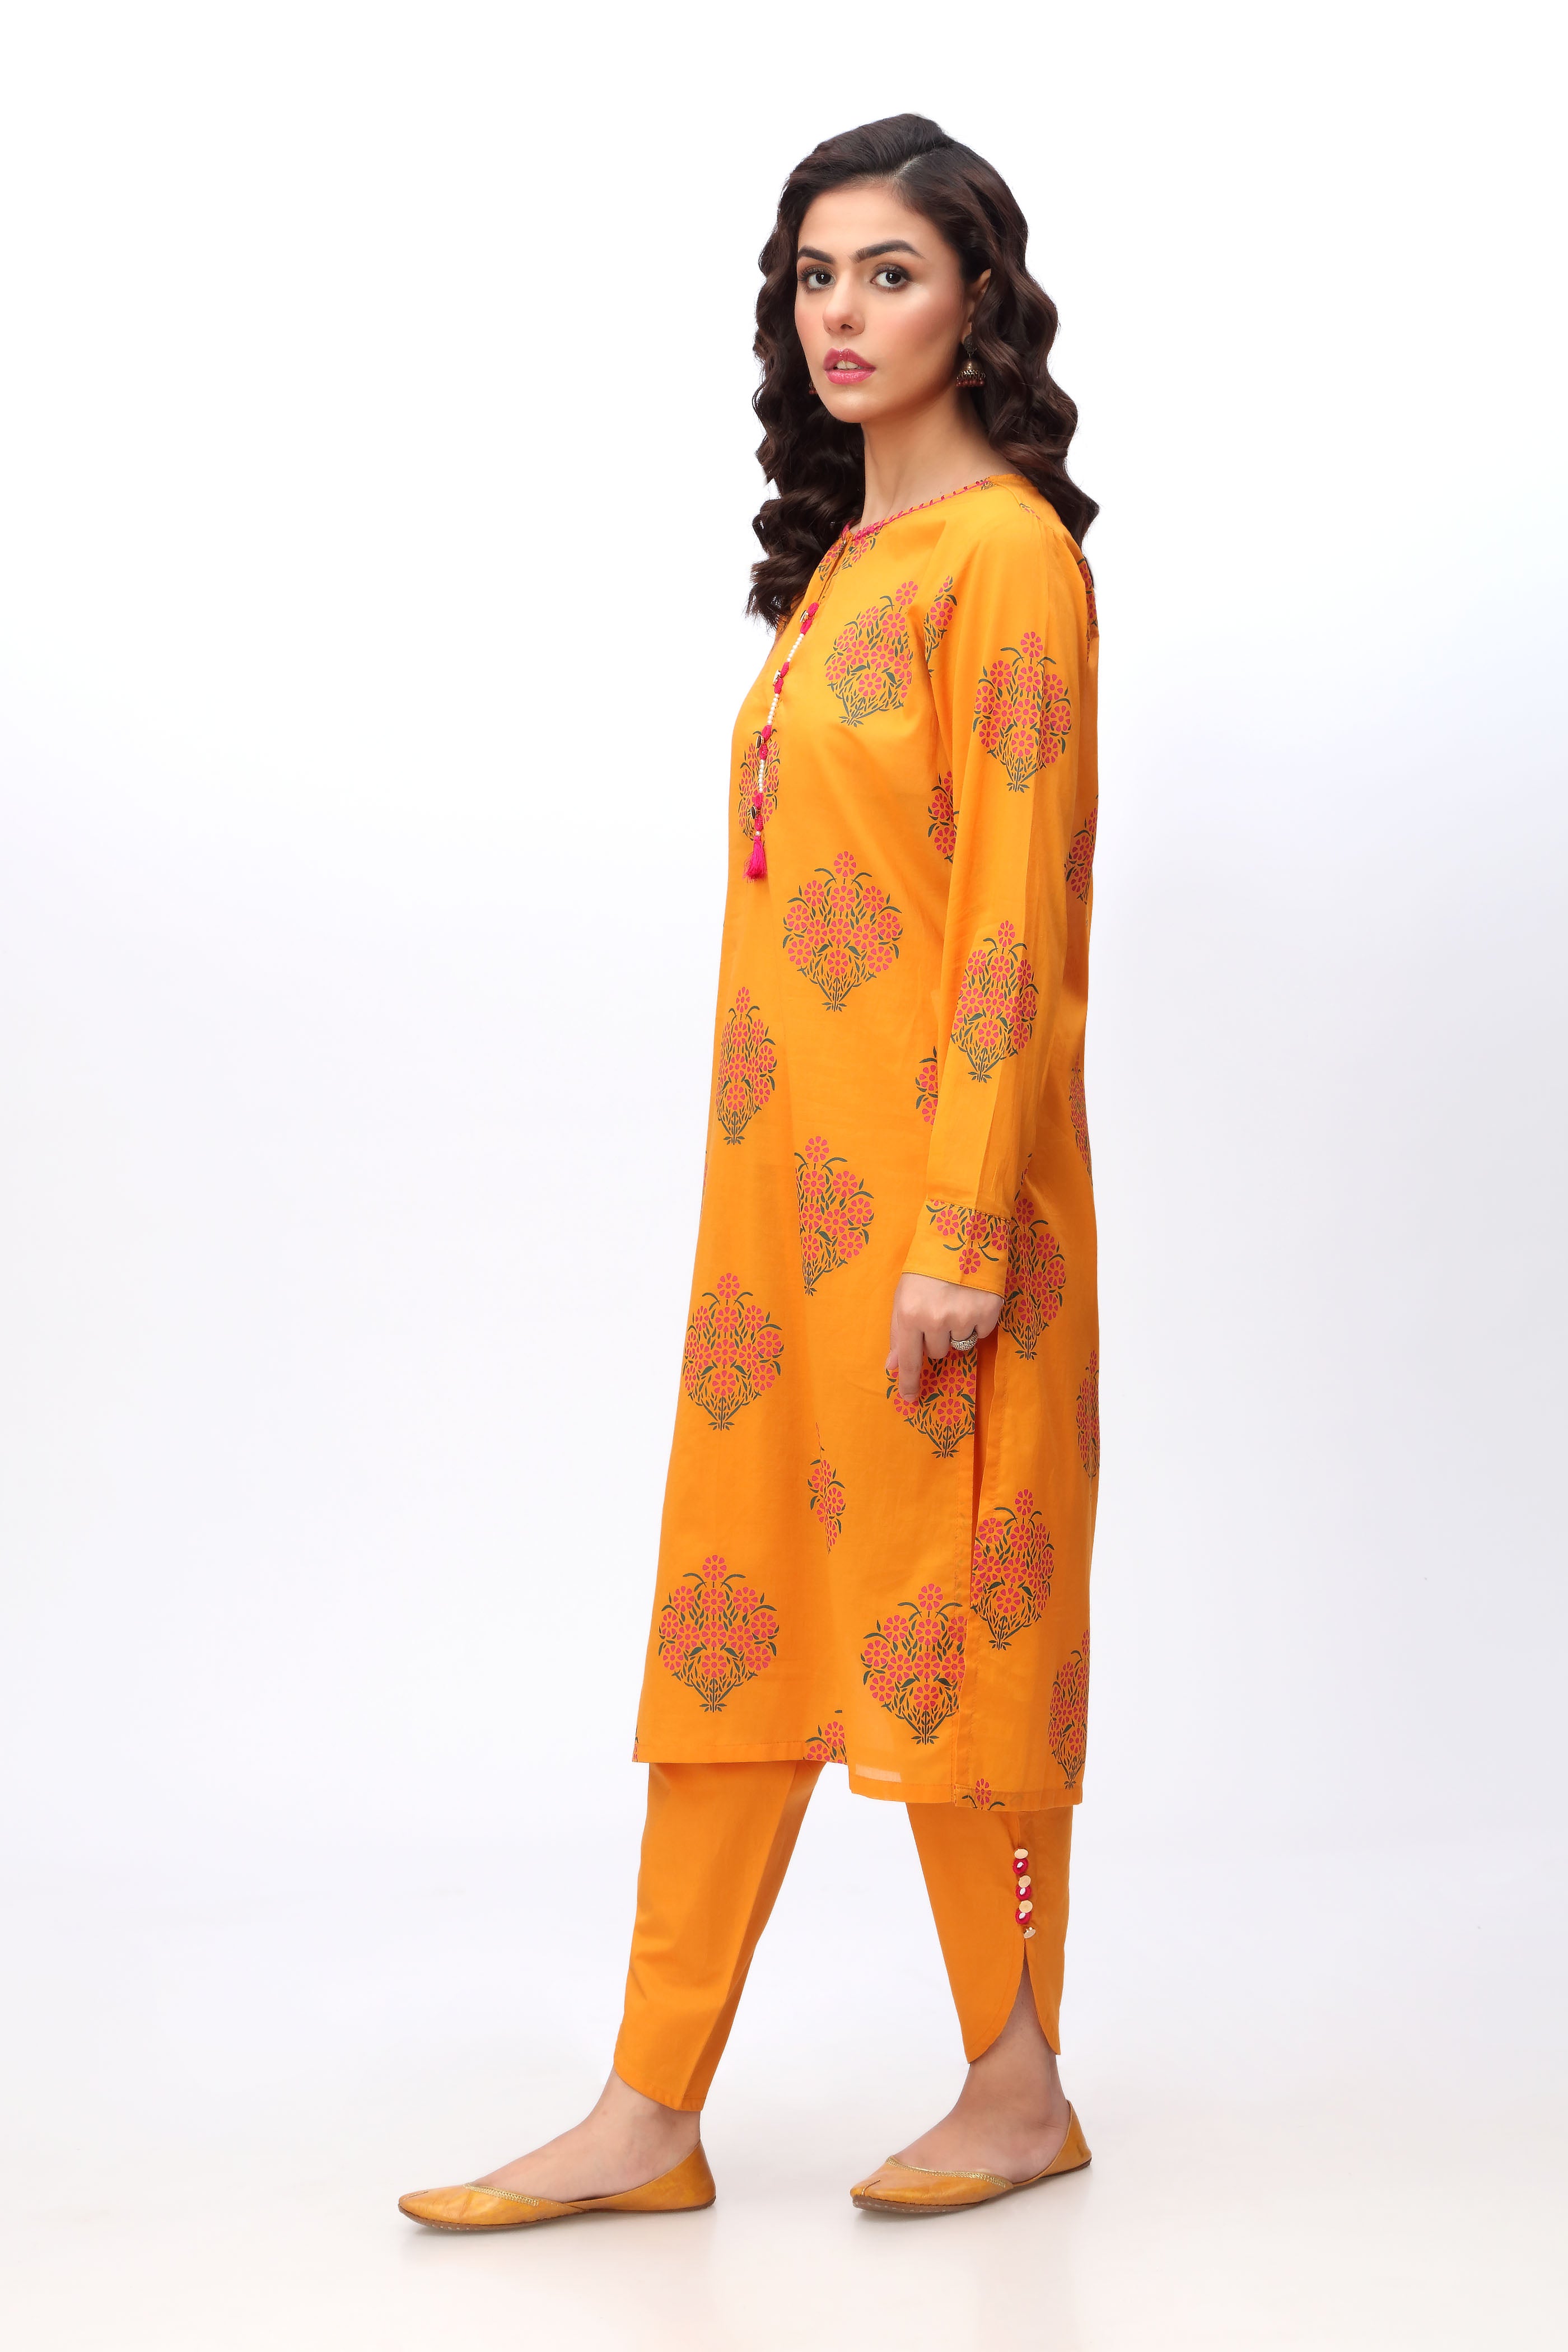 Pink Impression in Mustard coloured Printed Lawn fabric 2